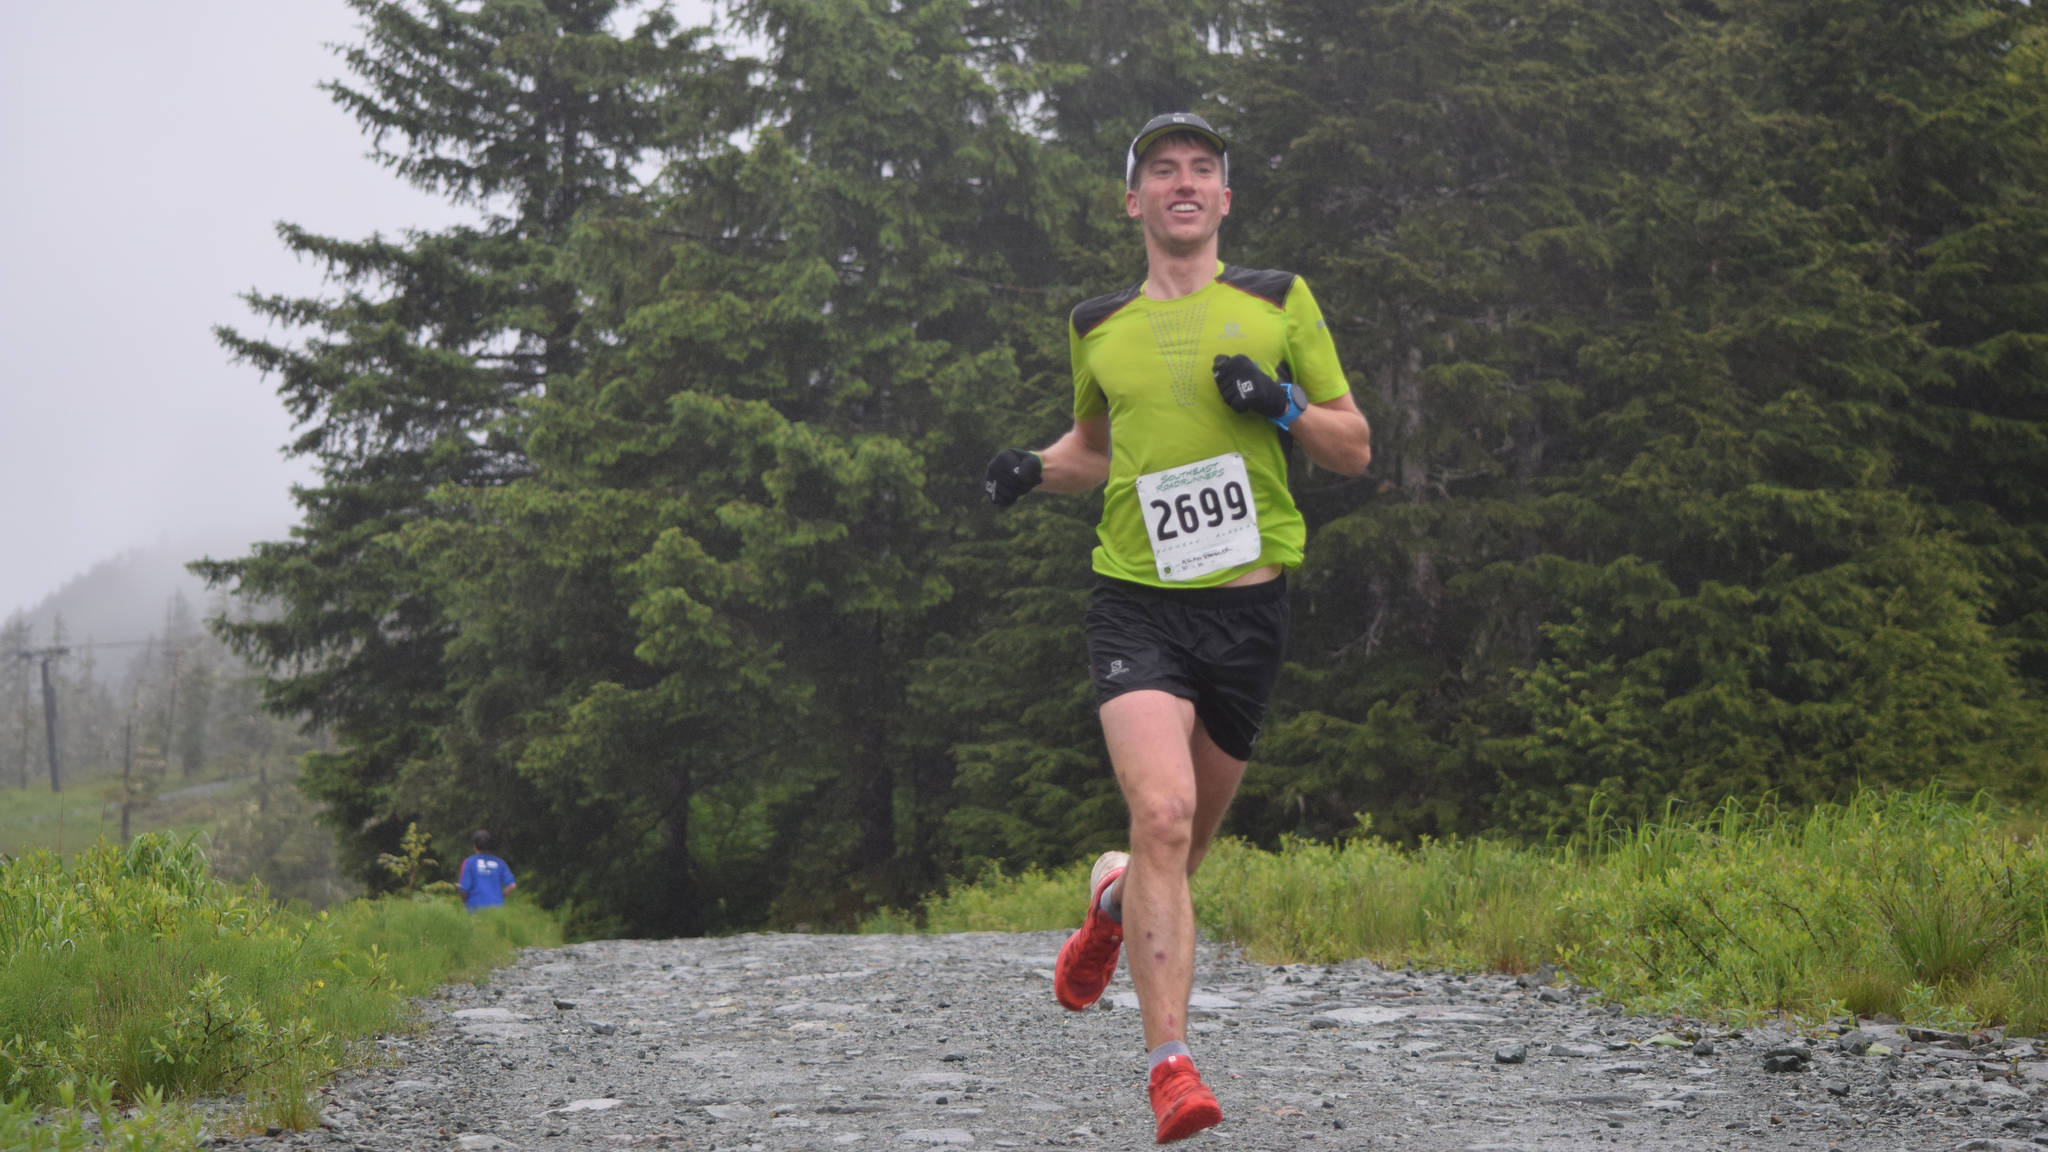 Allan Spangler runs in the Eaglecrest Road and Mountain Race, Saturday, July 1, 2017. Spangler won the race. (Nolin Ainsworth | Juneau Empire)